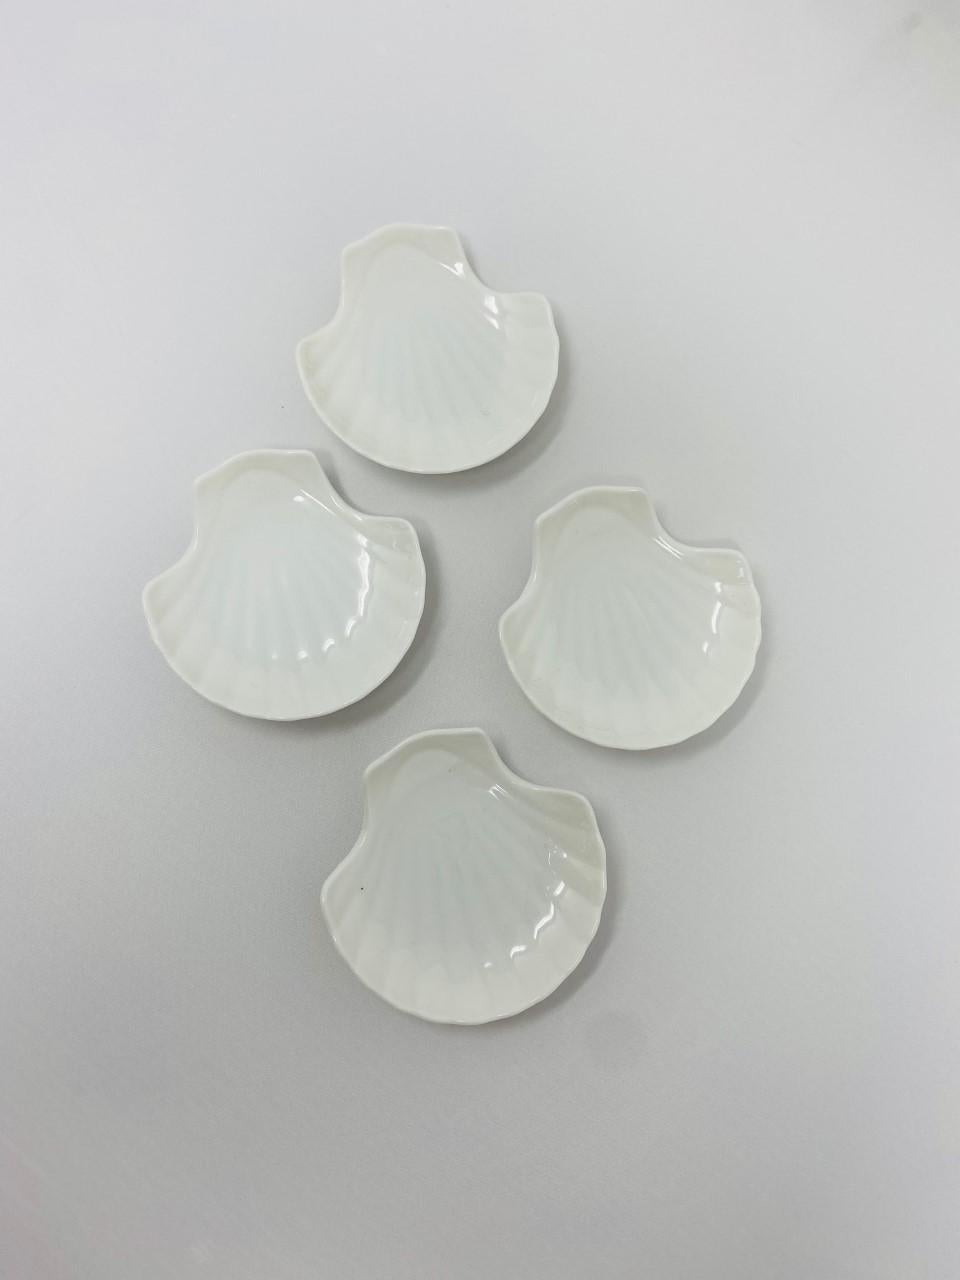 Vintage Japanese Porcelain Appetizer Plates 'Set of 4' Mid Century In Good Condition For Sale In San Diego, CA